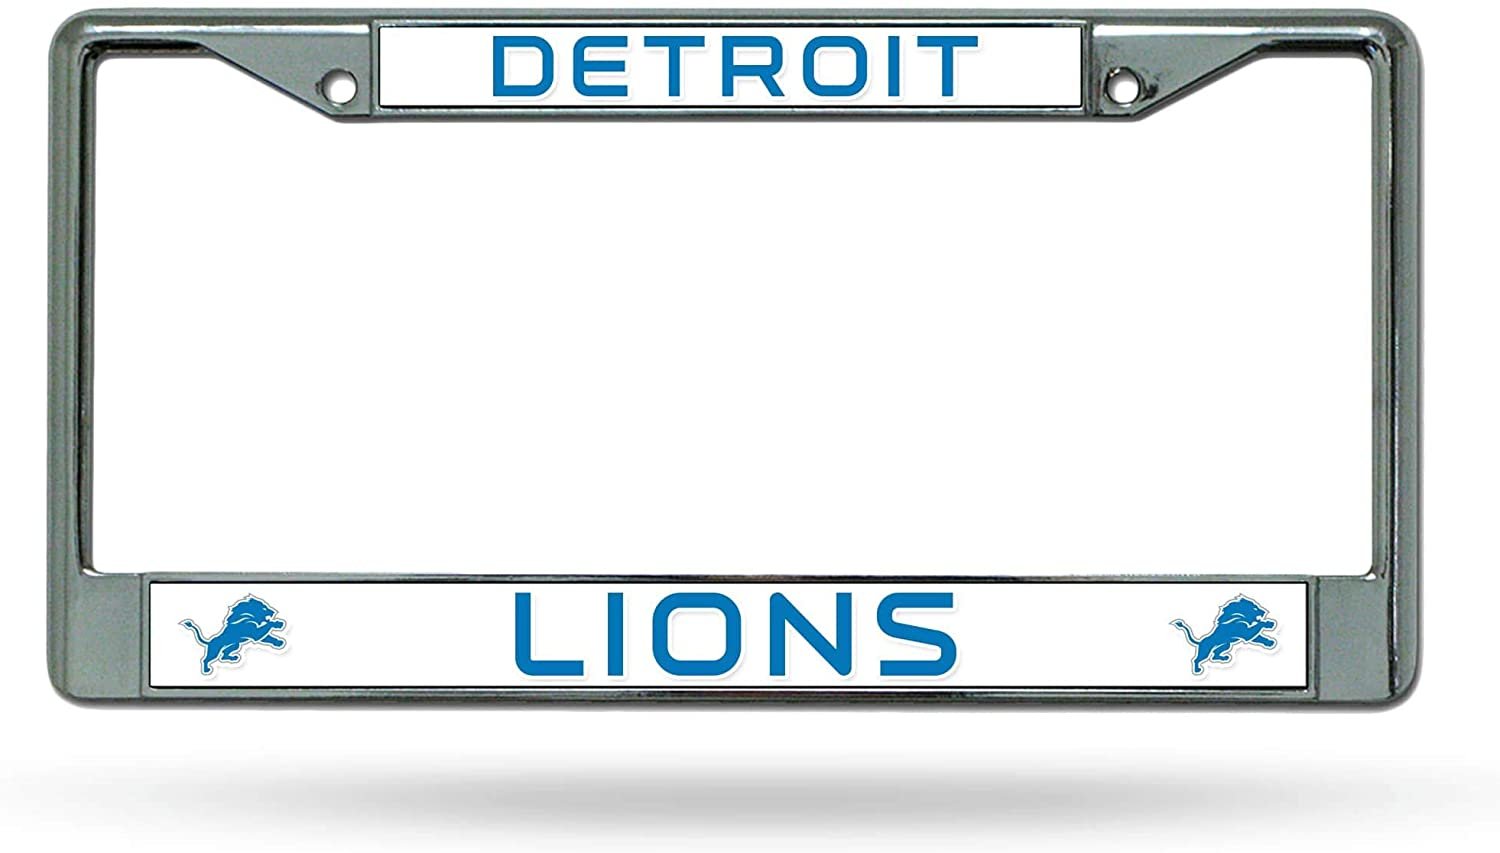 Detroit Lions Chrome Metal License Plate Frame Tag Cover